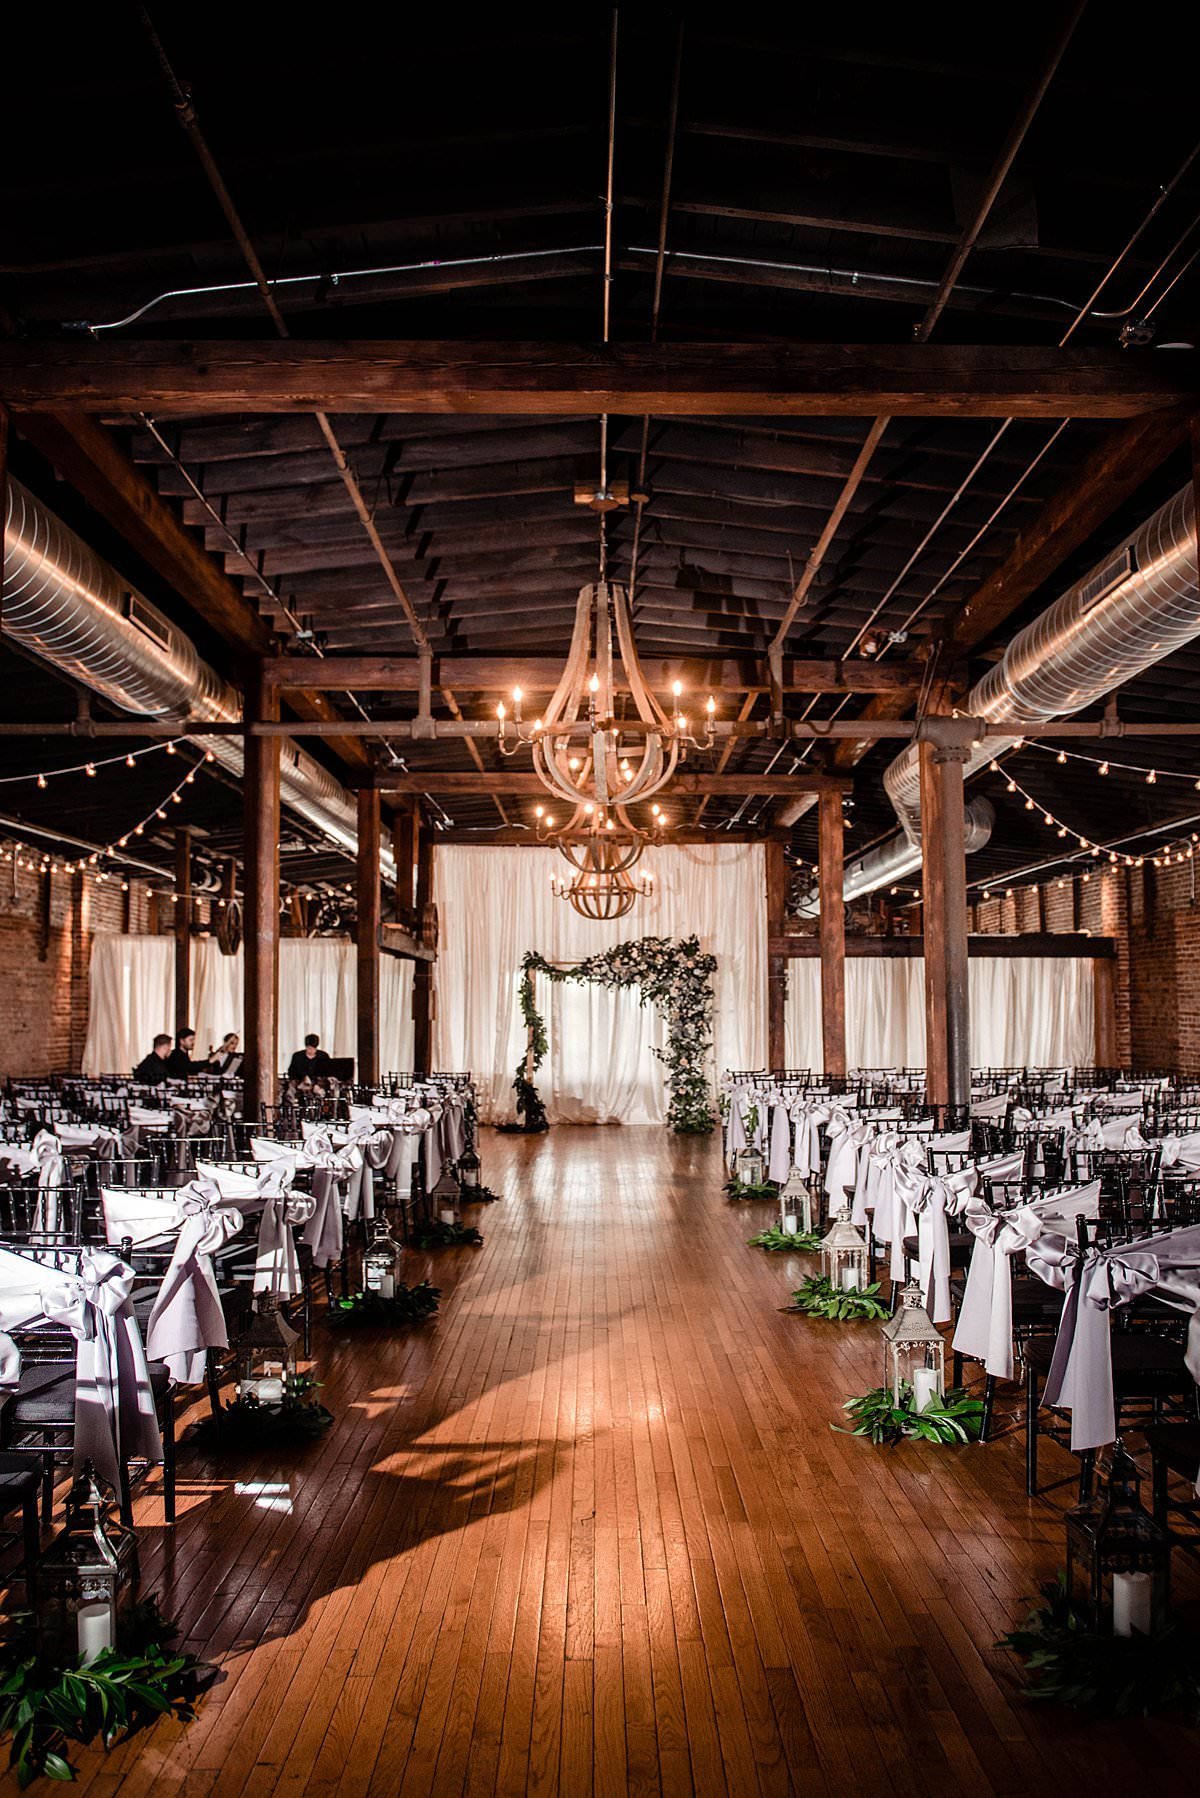 Inside ceremony set up for top floor at Cannery Ballroom showing chairs, chandelier and greenery covered arbor